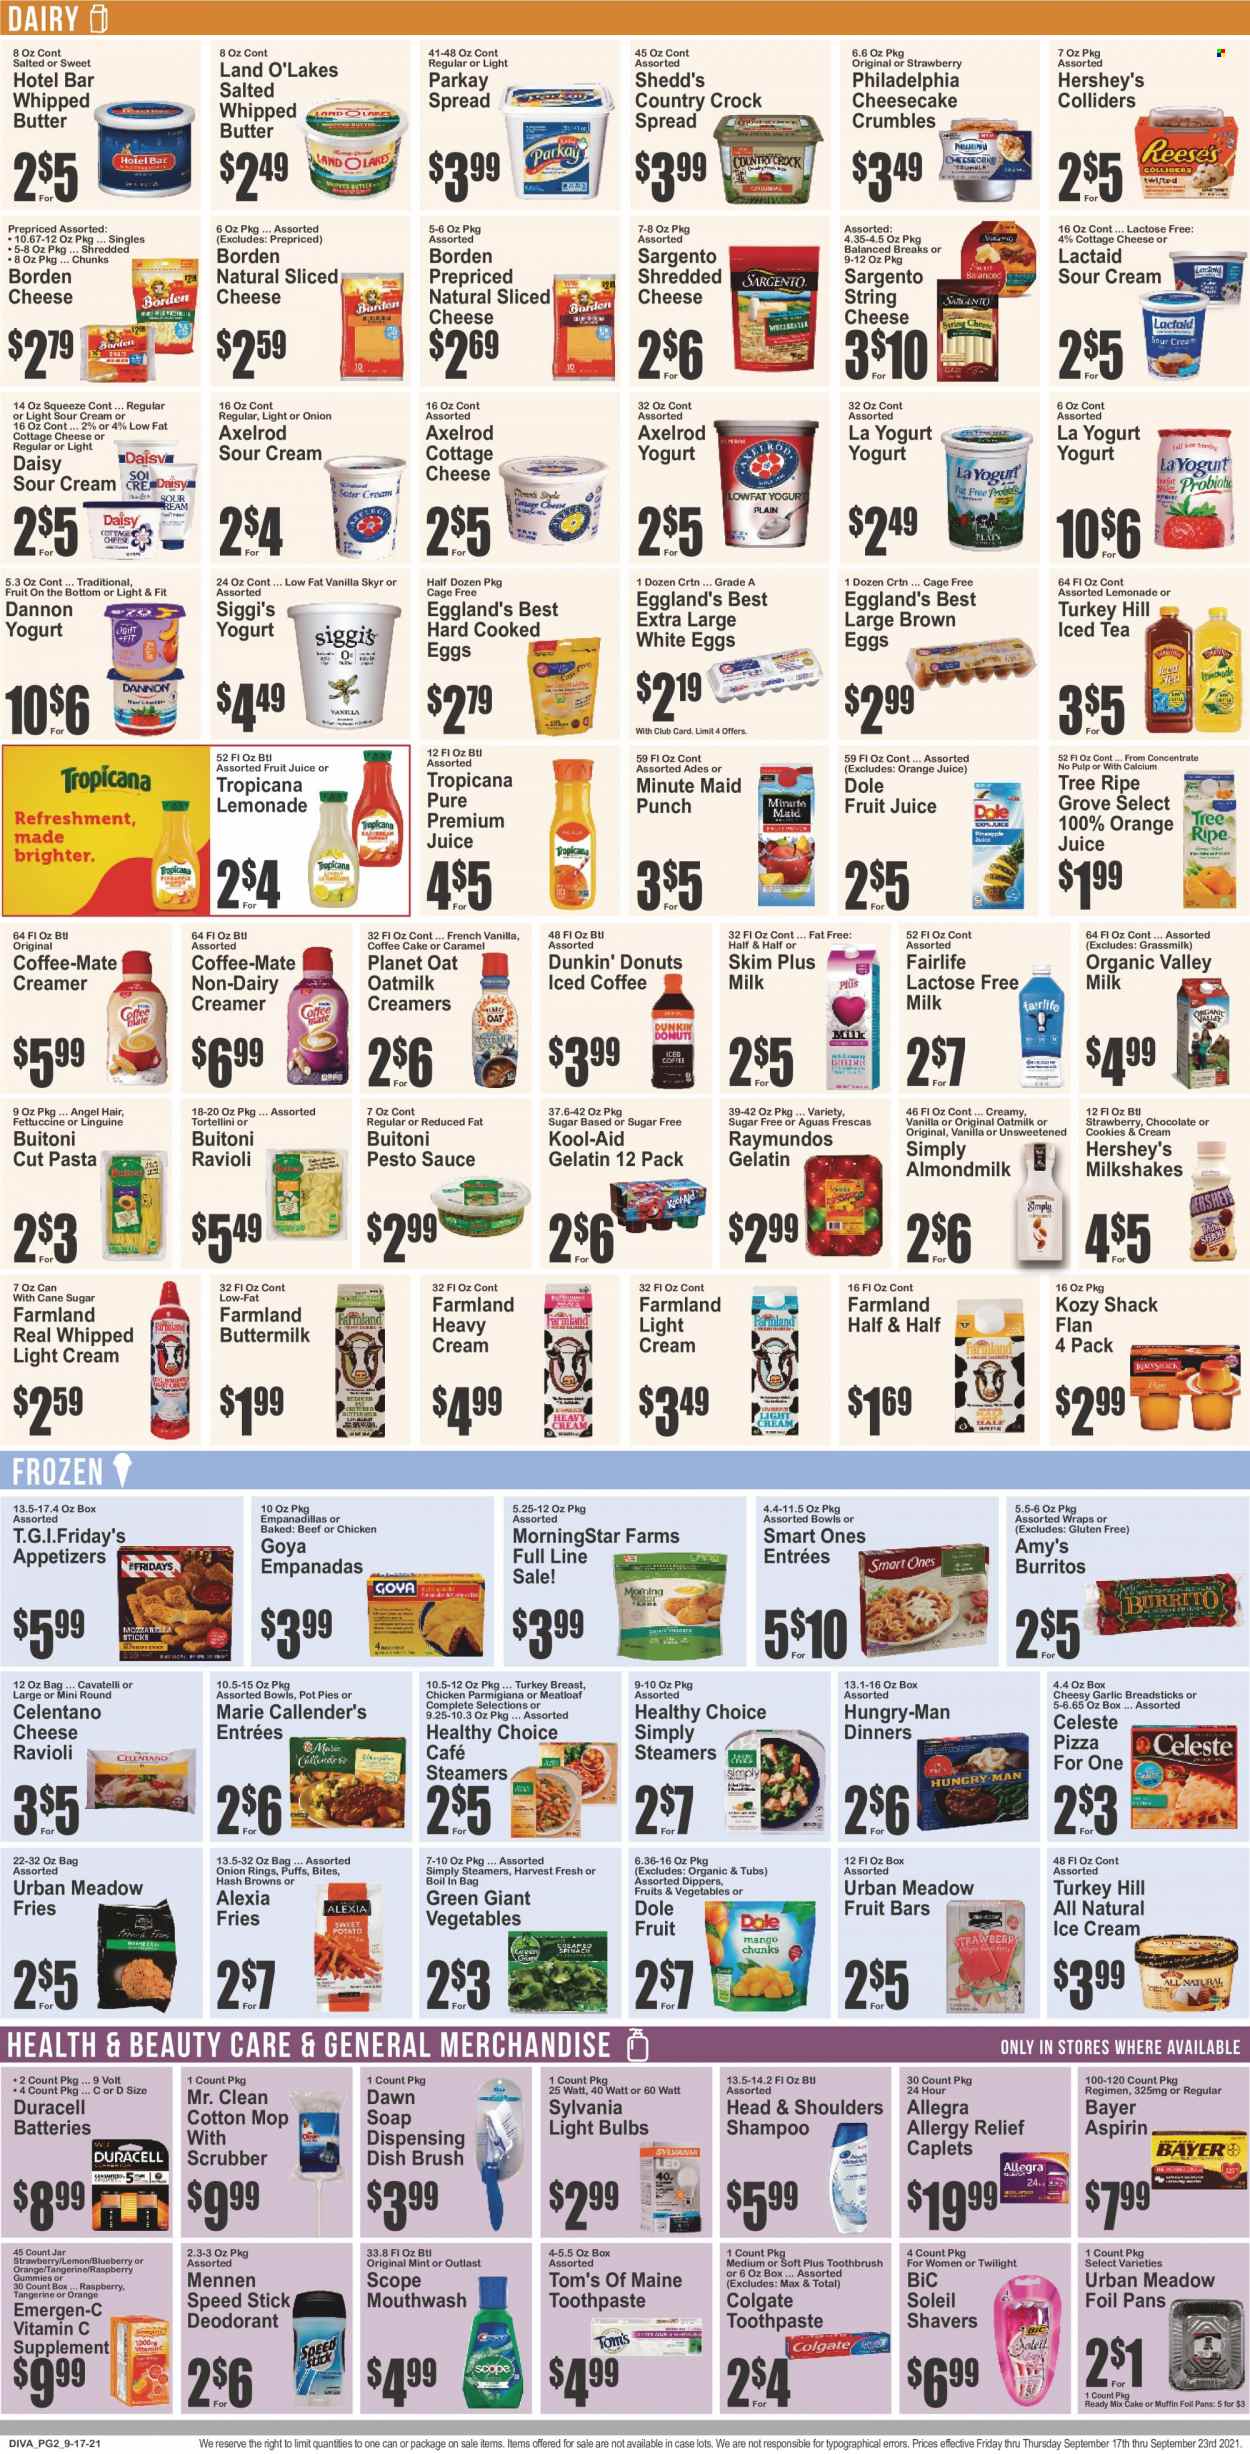 thumbnail - Key Food Flyer - 09/17/2021 - 09/23/2021 - Sales products - cake, wraps, pot pie, puffs, donut, muffin, coffee cake, Dunkin' Donuts, garlic, Dole, ravioli, pizza, onion rings, pasta, sauce, tortellini, meatloaf, burrito, MorningStar Farms, Healthy Choice, Marie Callender's, Buitoni, cottage cheese, Lactaid, shredded cheese, sliced cheese, string cheese, Philadelphia, Sargento, yoghurt, Dannon, almond milk, buttermilk, Coffee-Mate, lactose free milk, oat milk, eggs, cage free eggs, whipped butter, sour cream, non dairy creamer, creamer, ice cream, Hershey's, parmigiana, hash browns, potato fries, Celeste, cookies, bread sticks, cane sugar, Goya, pesto, lemonade, orange juice, juice, fruit juice, ice tea, fruit punch, iced coffee, turkey breast, shampoo, soap, Colgate, toothbrush, toothpaste, mouthwash, Head & Shoulders, anti-perspirant, Speed Stick, deodorant, BIC, mop, dish brush, battery, bulb, Duracell, light bulb, Sylvania, gelatin, calcium, vitamin c, Emergen-C, aspirin, Bayer, allergy relief, Half and half. Page 2.